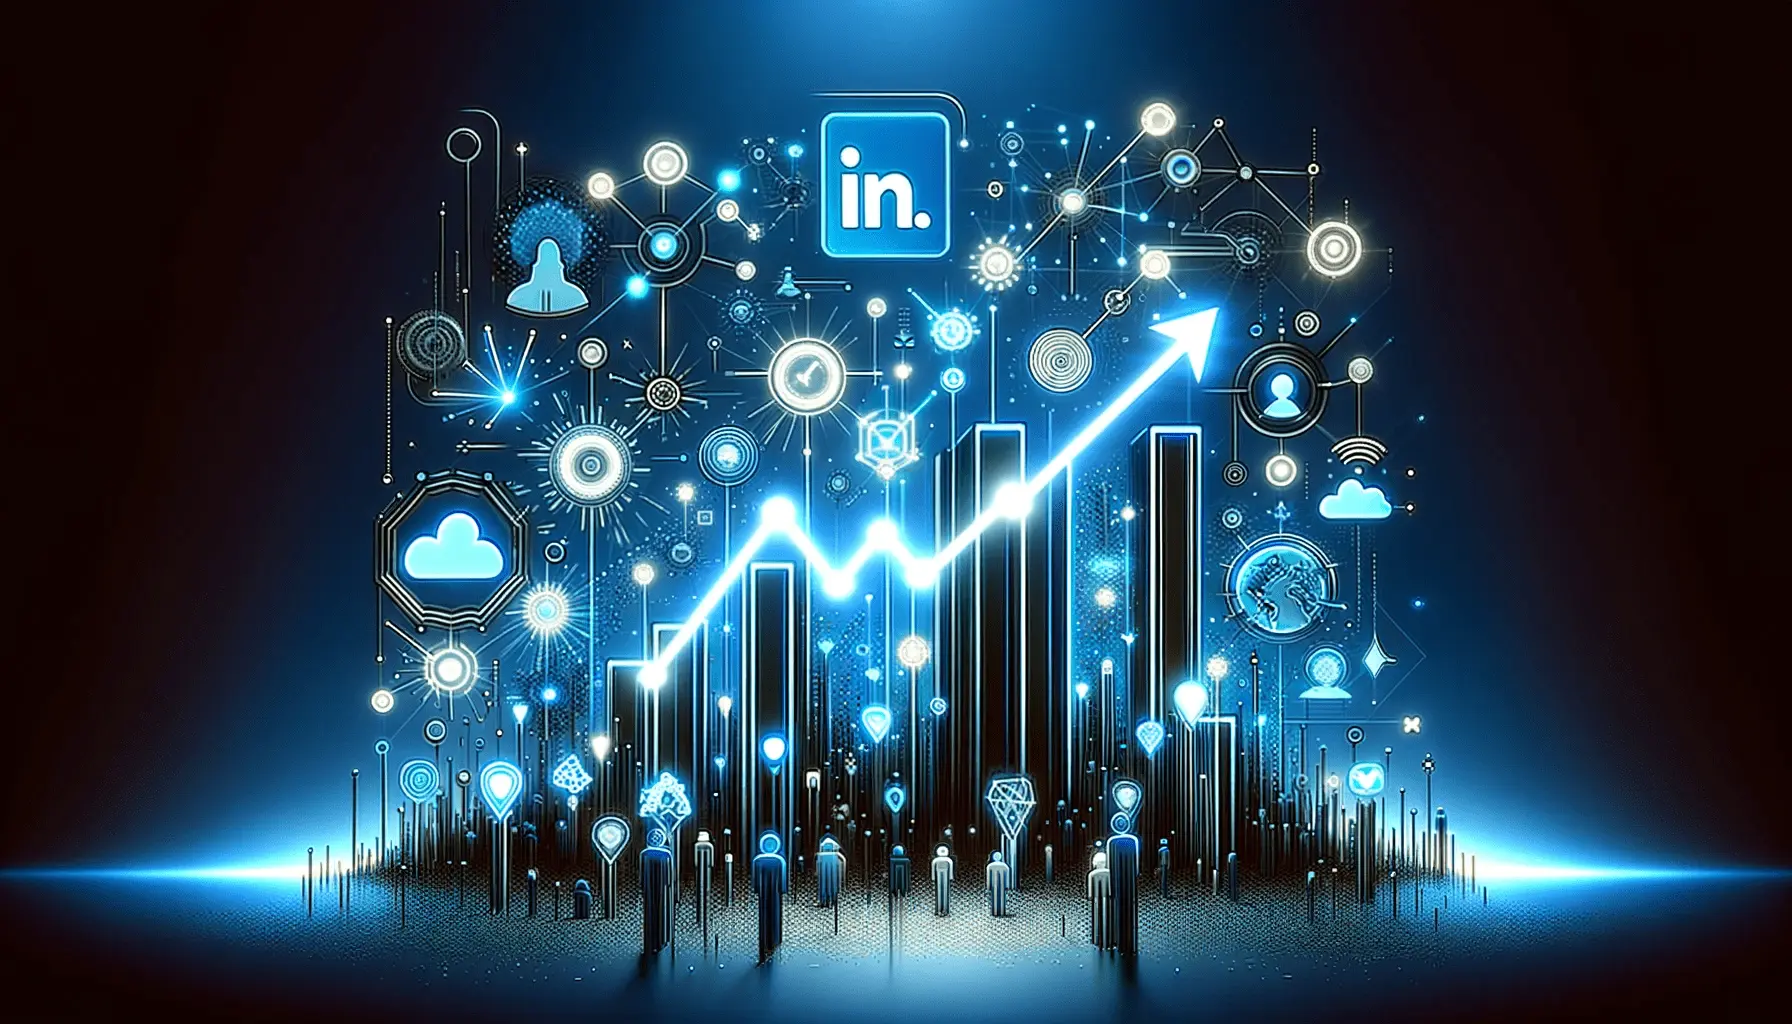 Content Series That Will Boost Your LinkedIn Engagement